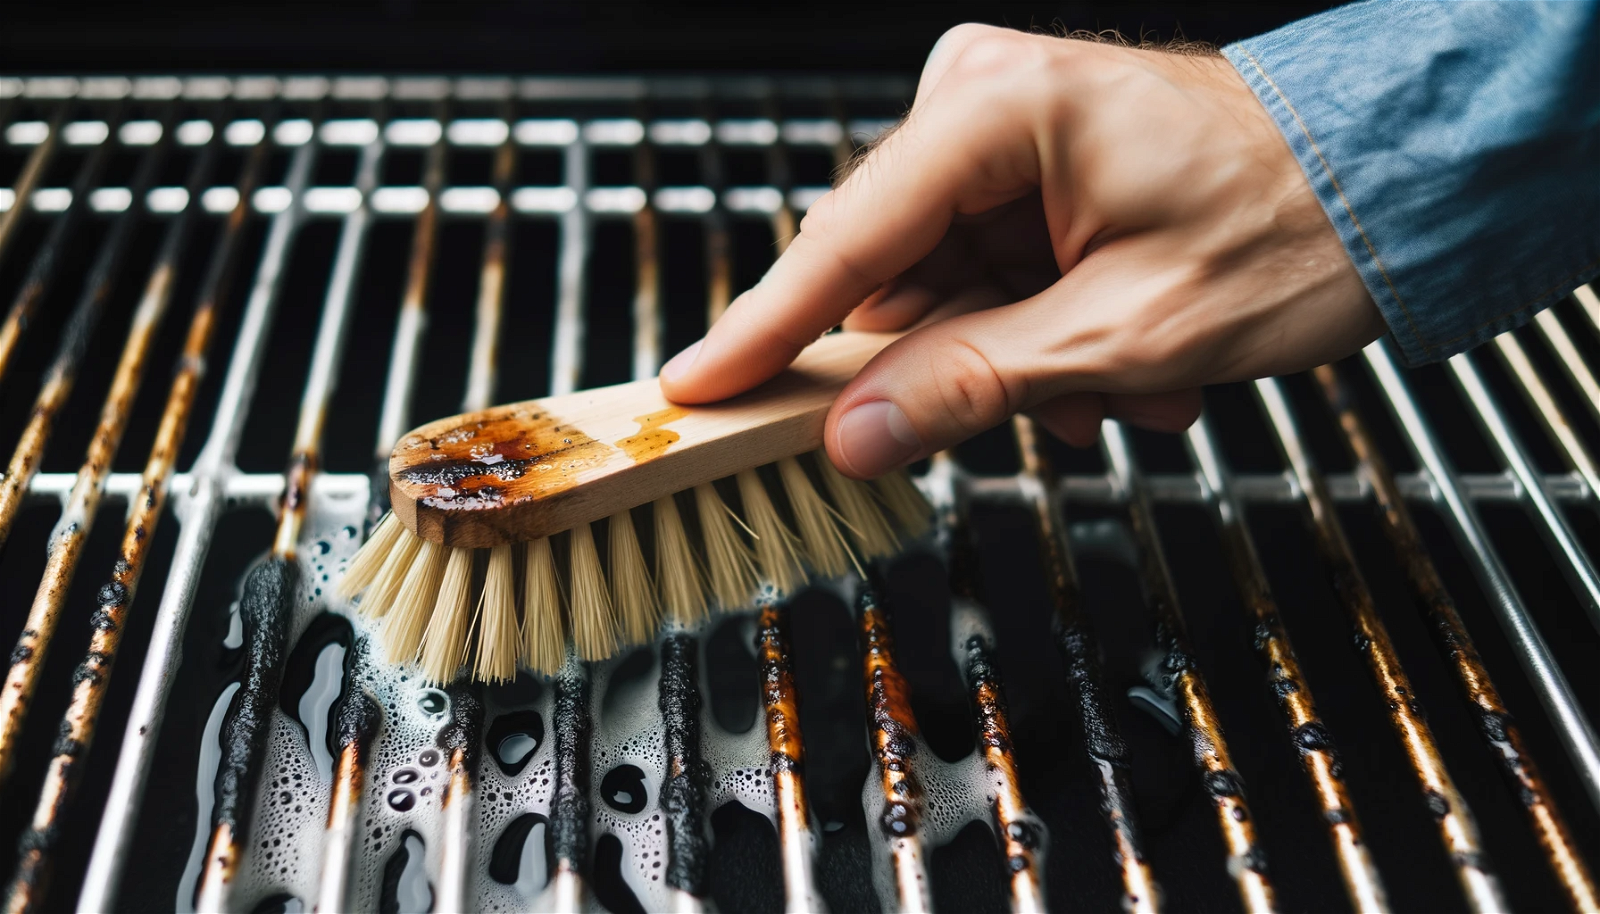 How to Clean a Gas Grill: Expert Tips for Barbecue Season